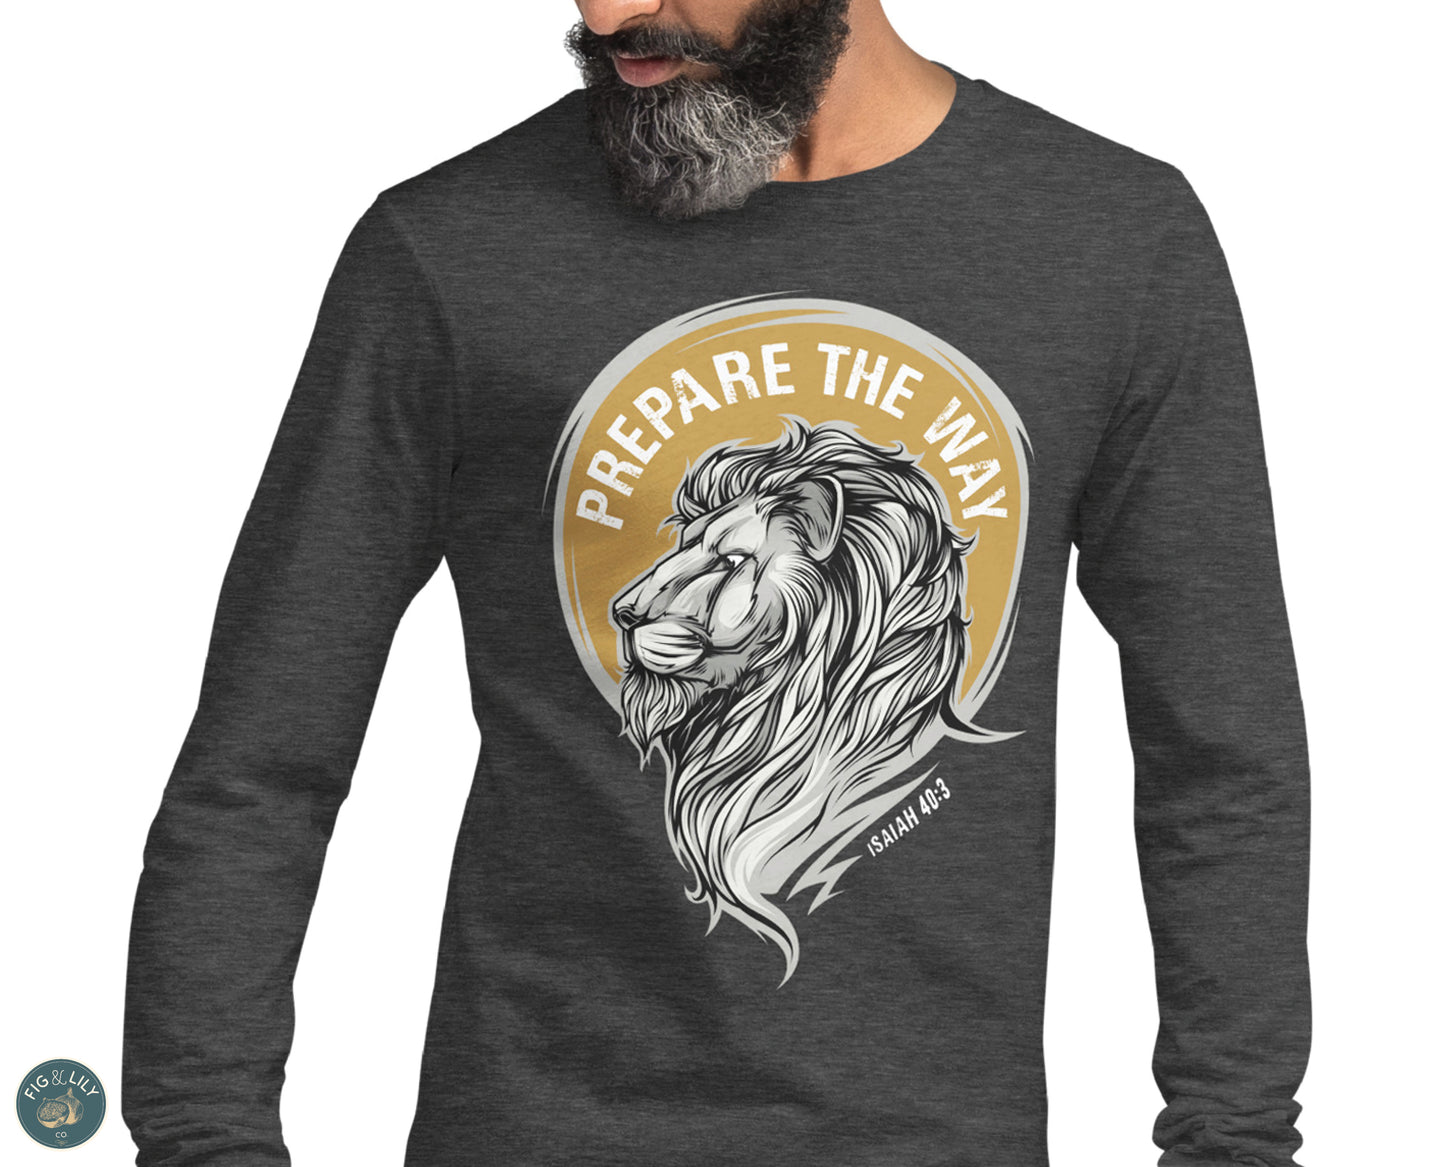 Lion of Judah Prepare the Way Isaiah 40:3 Christian aesthetic design printed in white and gold on soft heather dark gray long sleeve tee for men & women